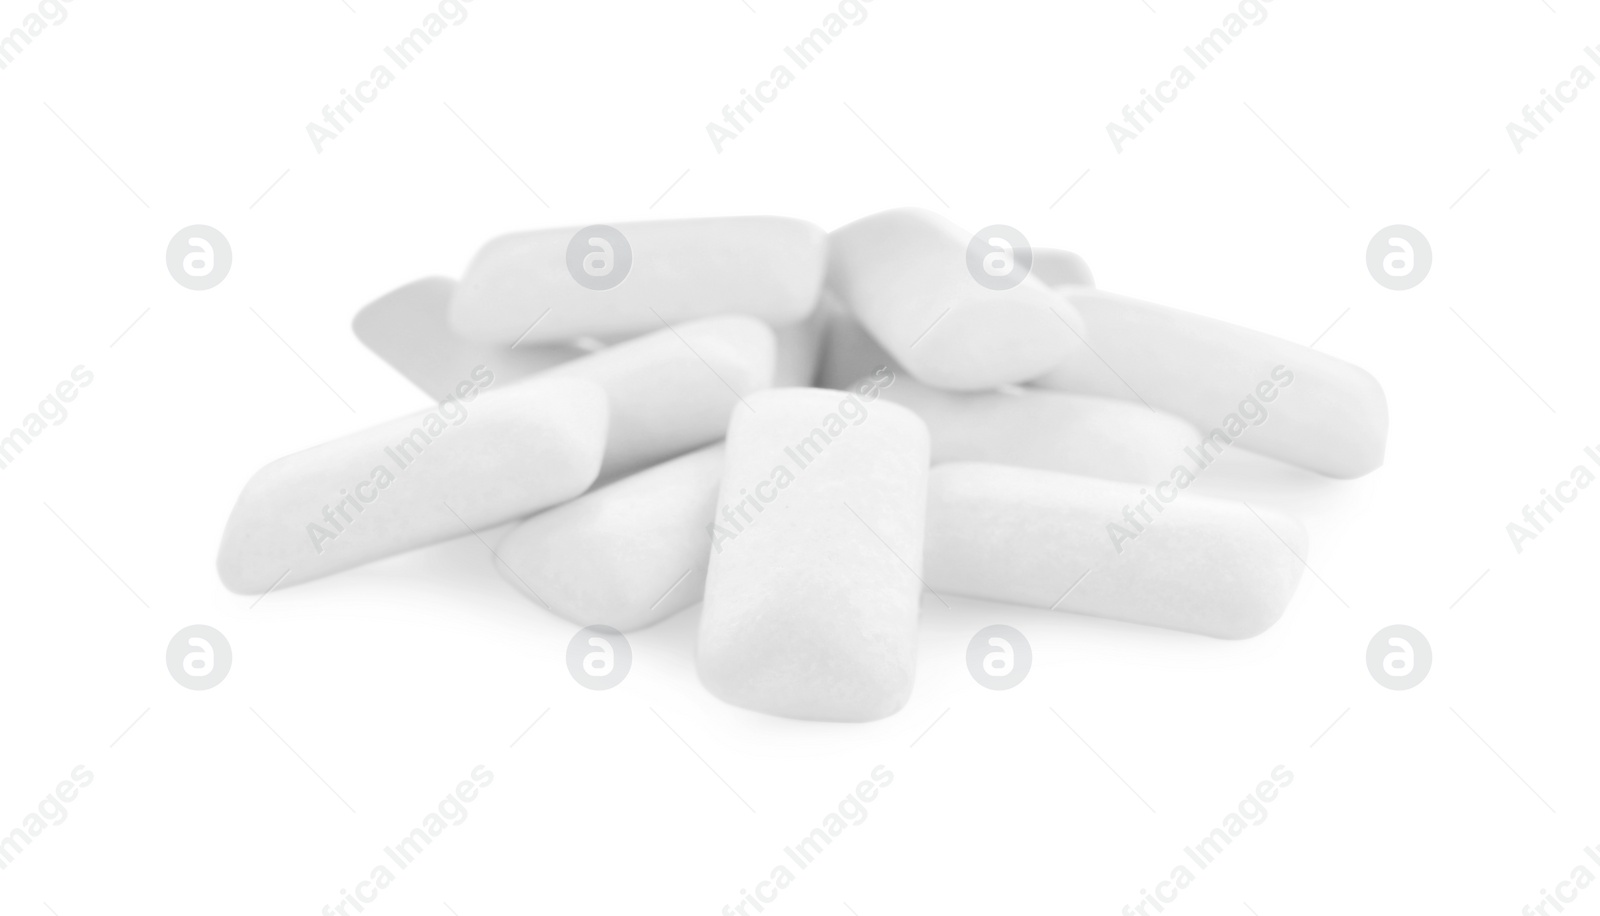 Photo of Heap of chewing gum pieces on white background